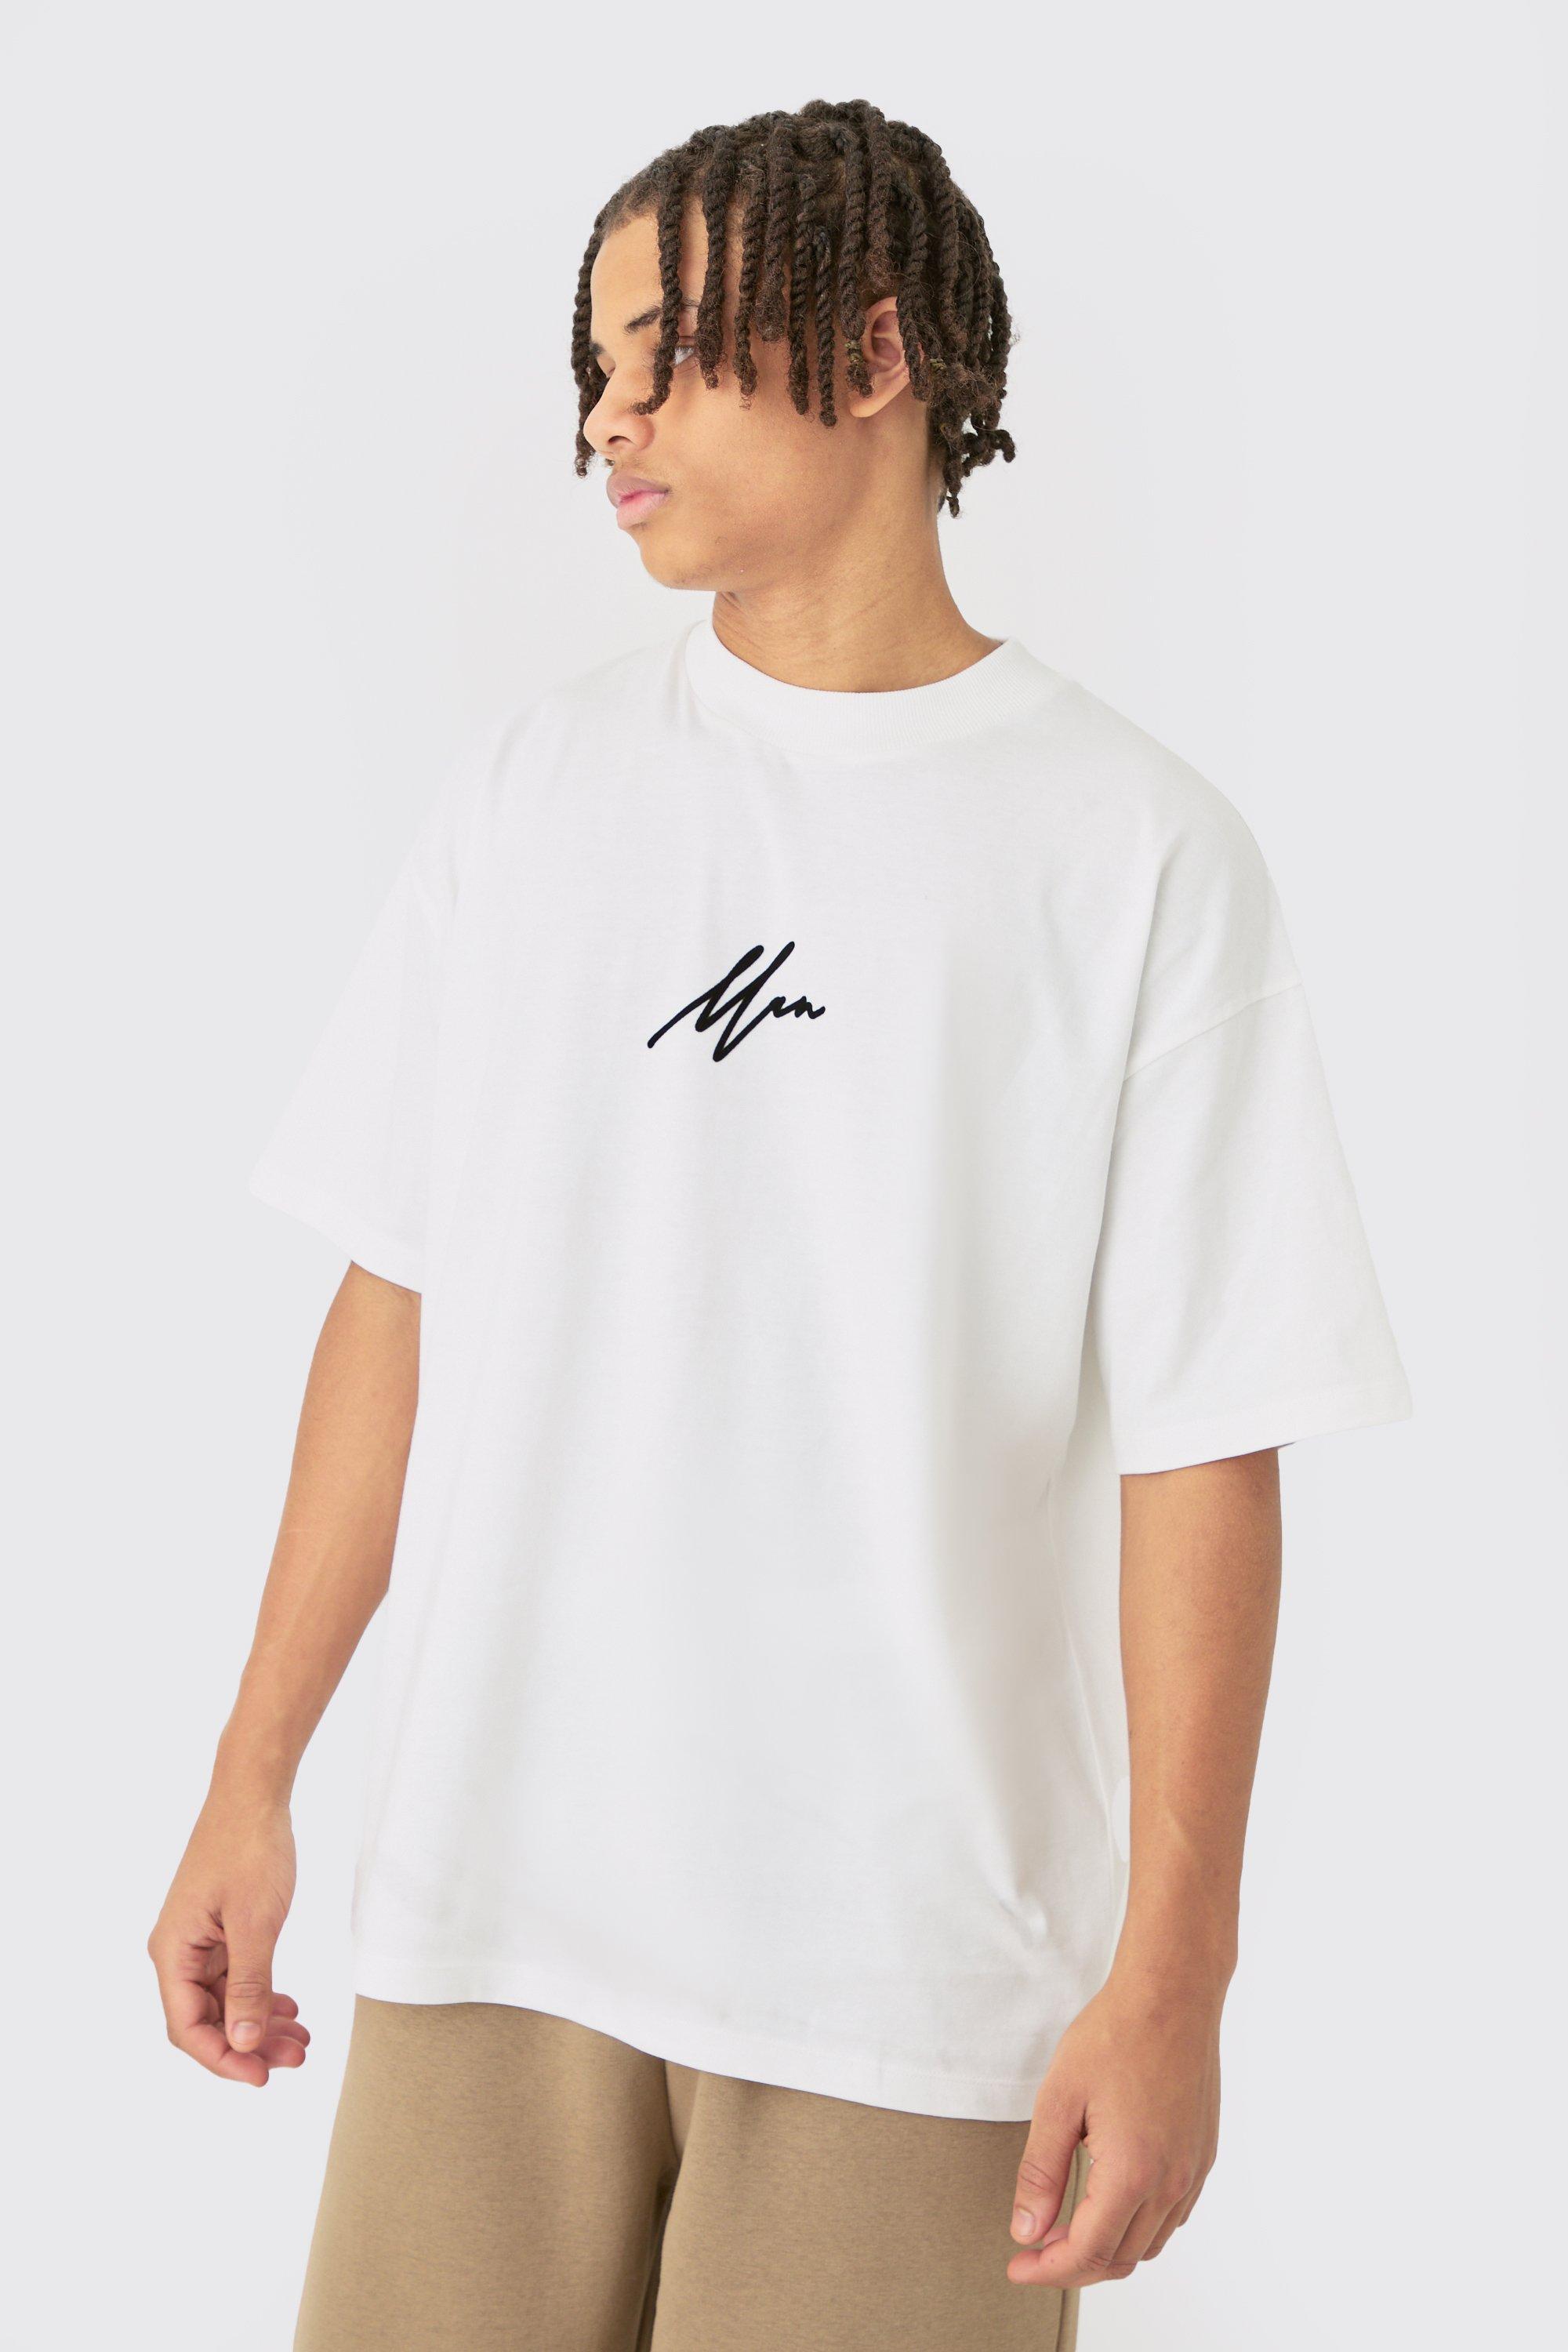 Image of Oversized Extended Neck Man Flock Printed T-shirt, Cream